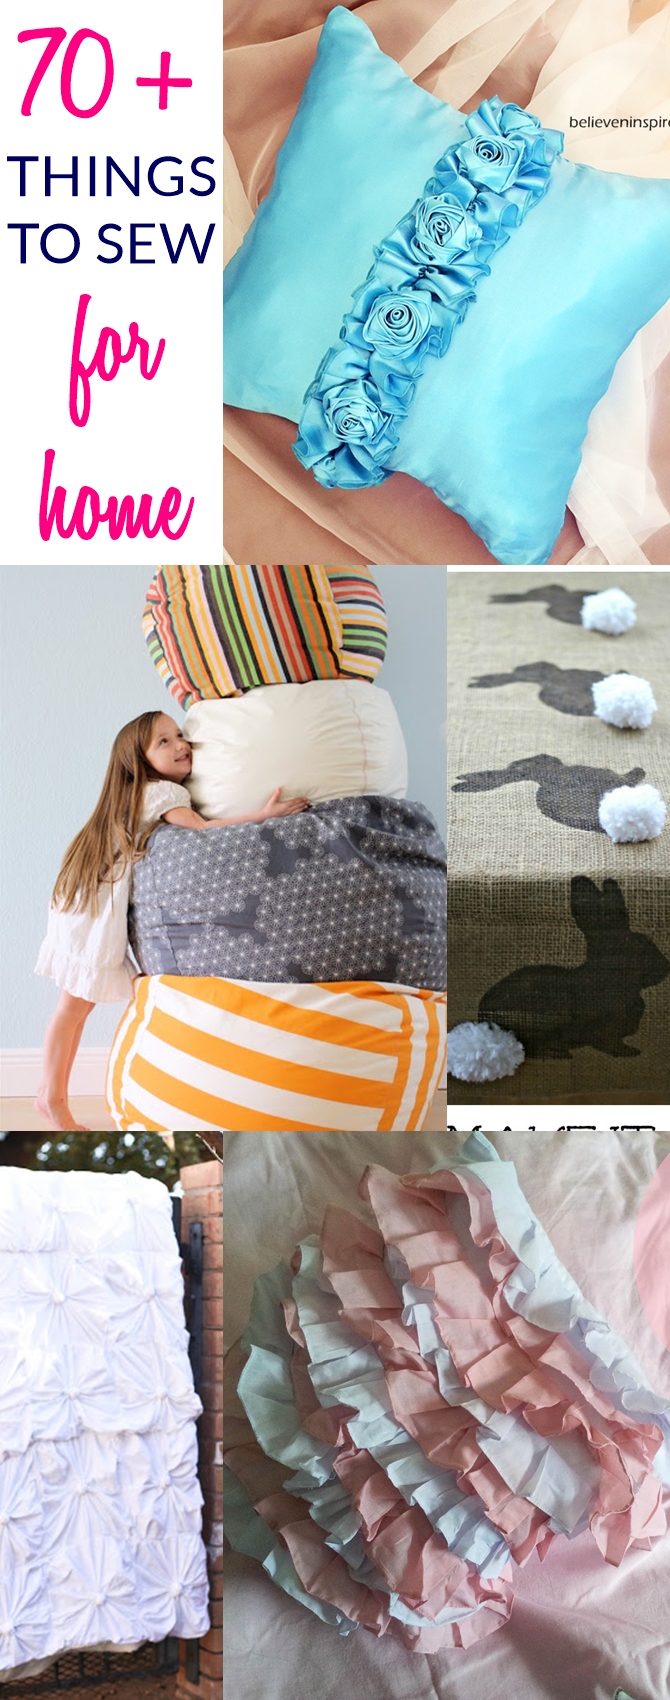 70 Things to Sew for Home (Sewing Ideas)